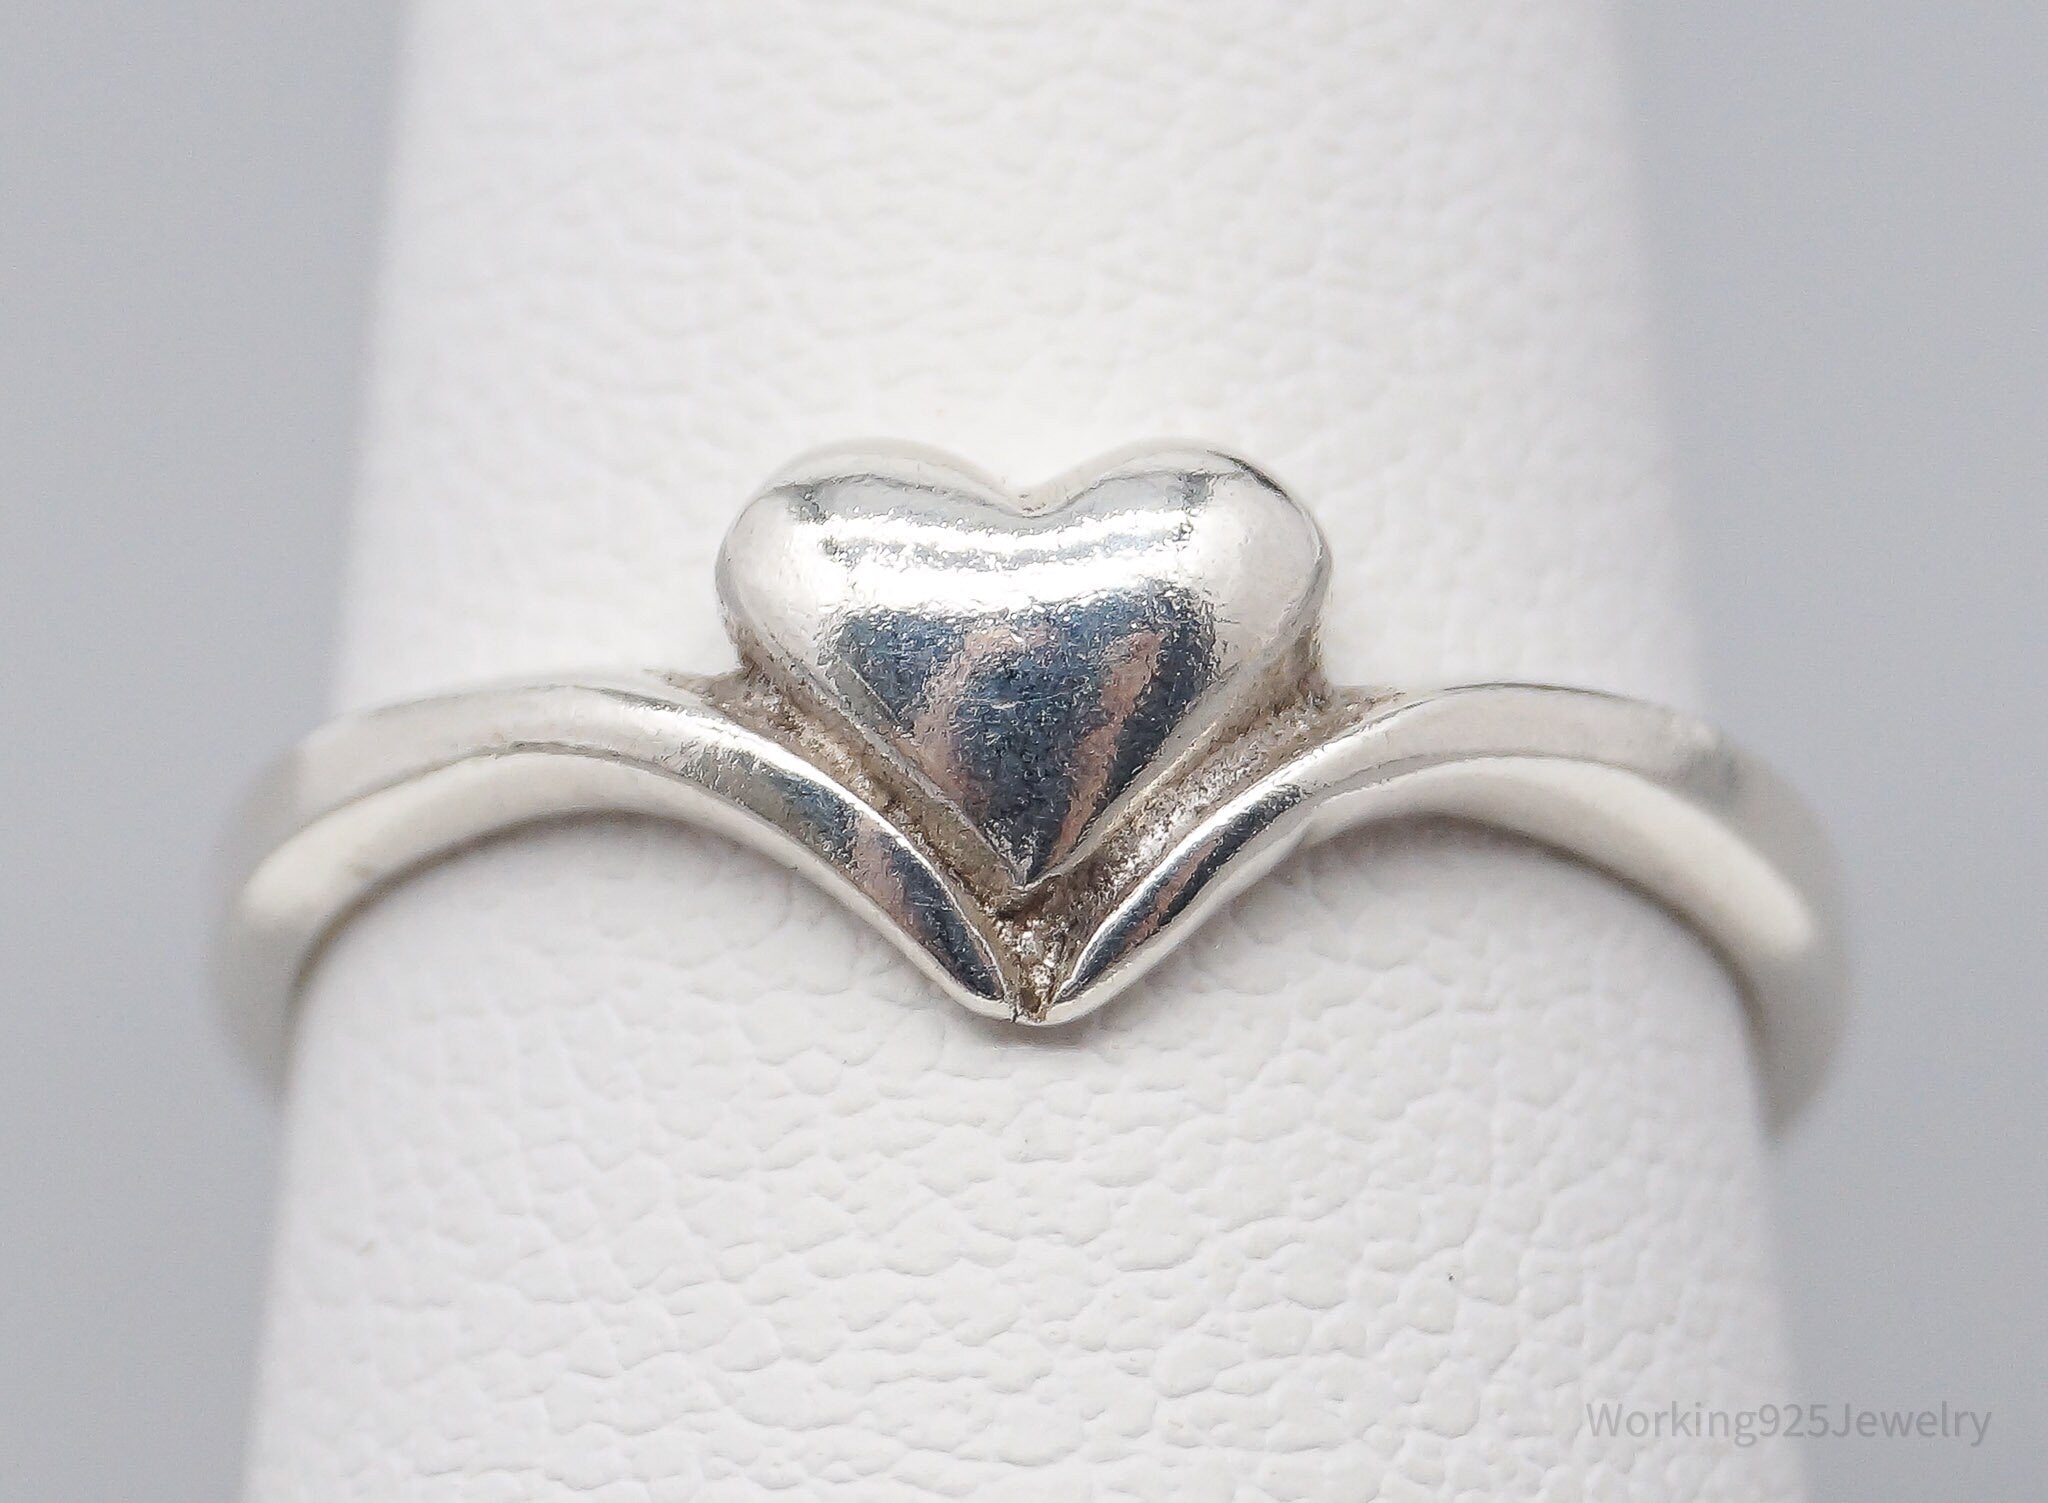 Vintage Puffy Heart Sterling Silver Ring - Size 5.5